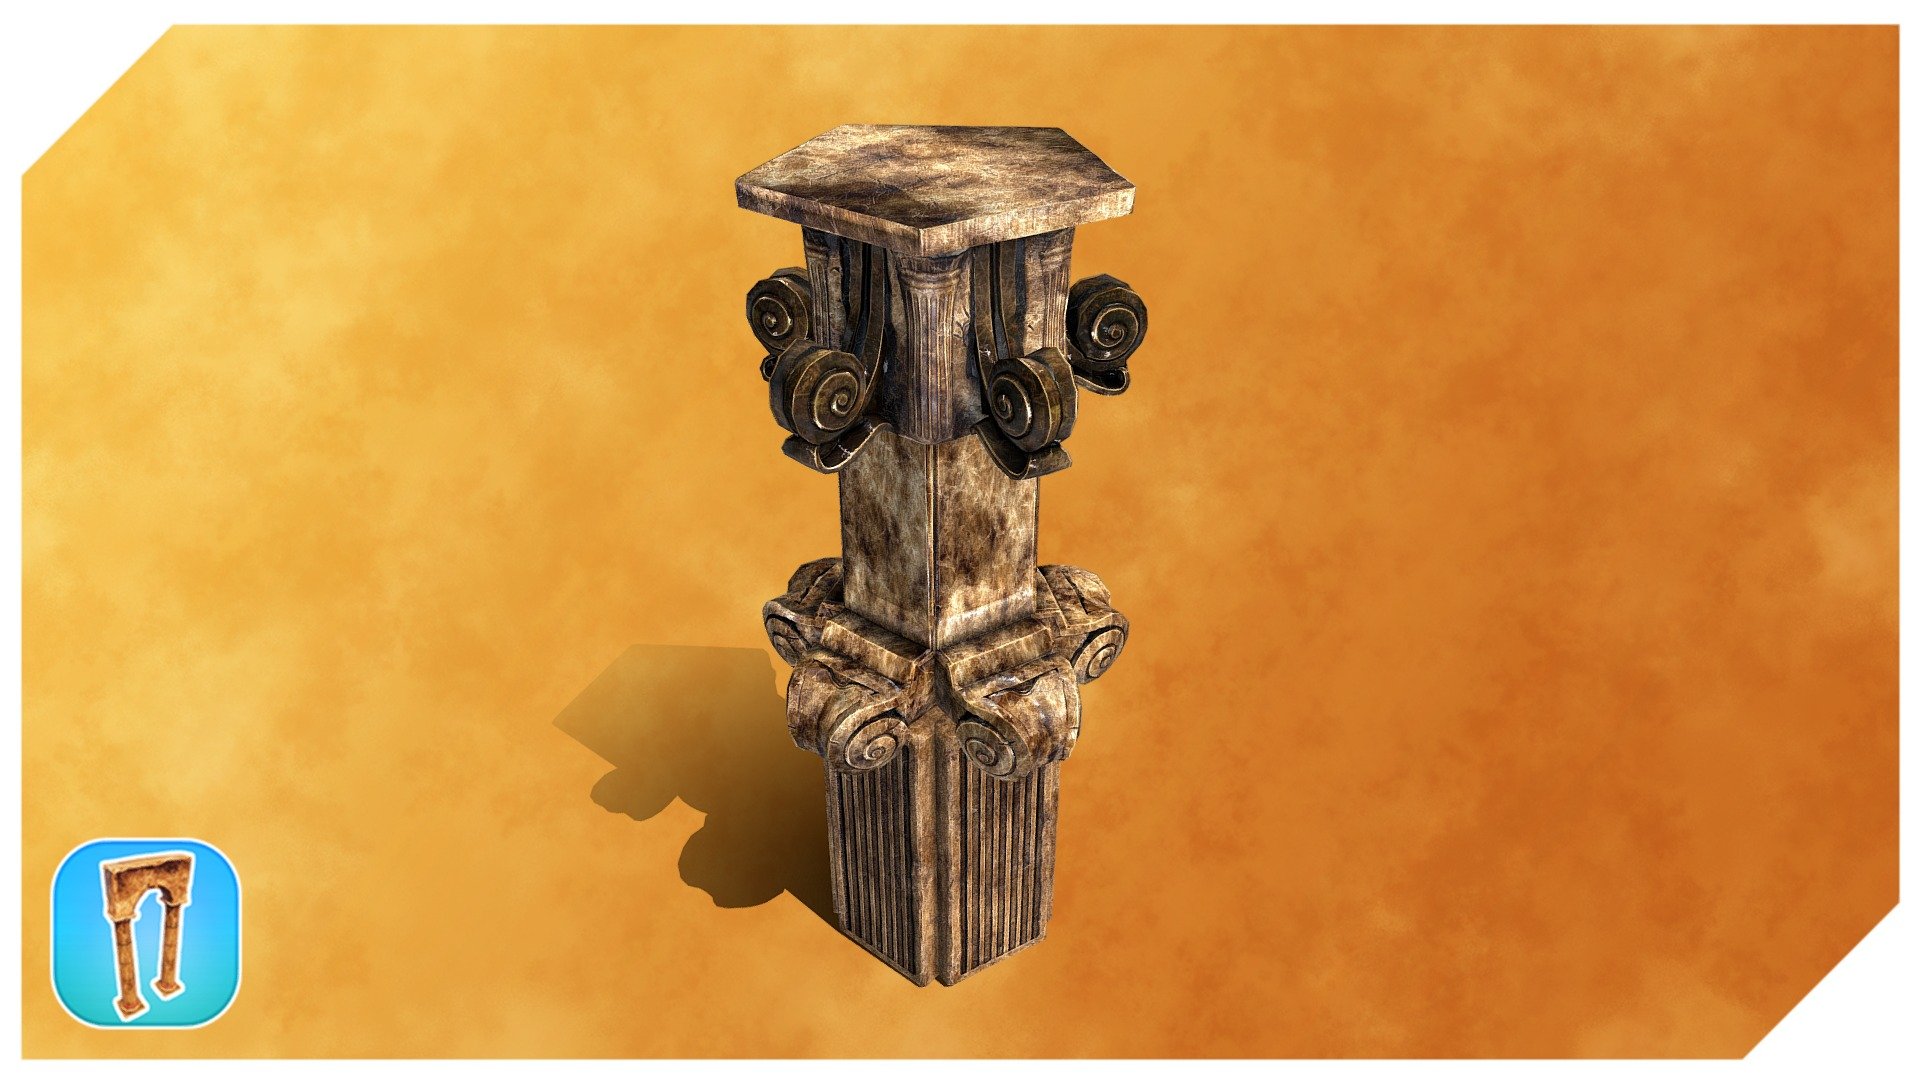 Pillar asset created from three individual assets with separate texture sets. 
Individual assets can be used as well. Comes with 2k PBR texture sets (Albedo, Normal, Roughness and AO).
Highly optimized for use in realtime 3d model